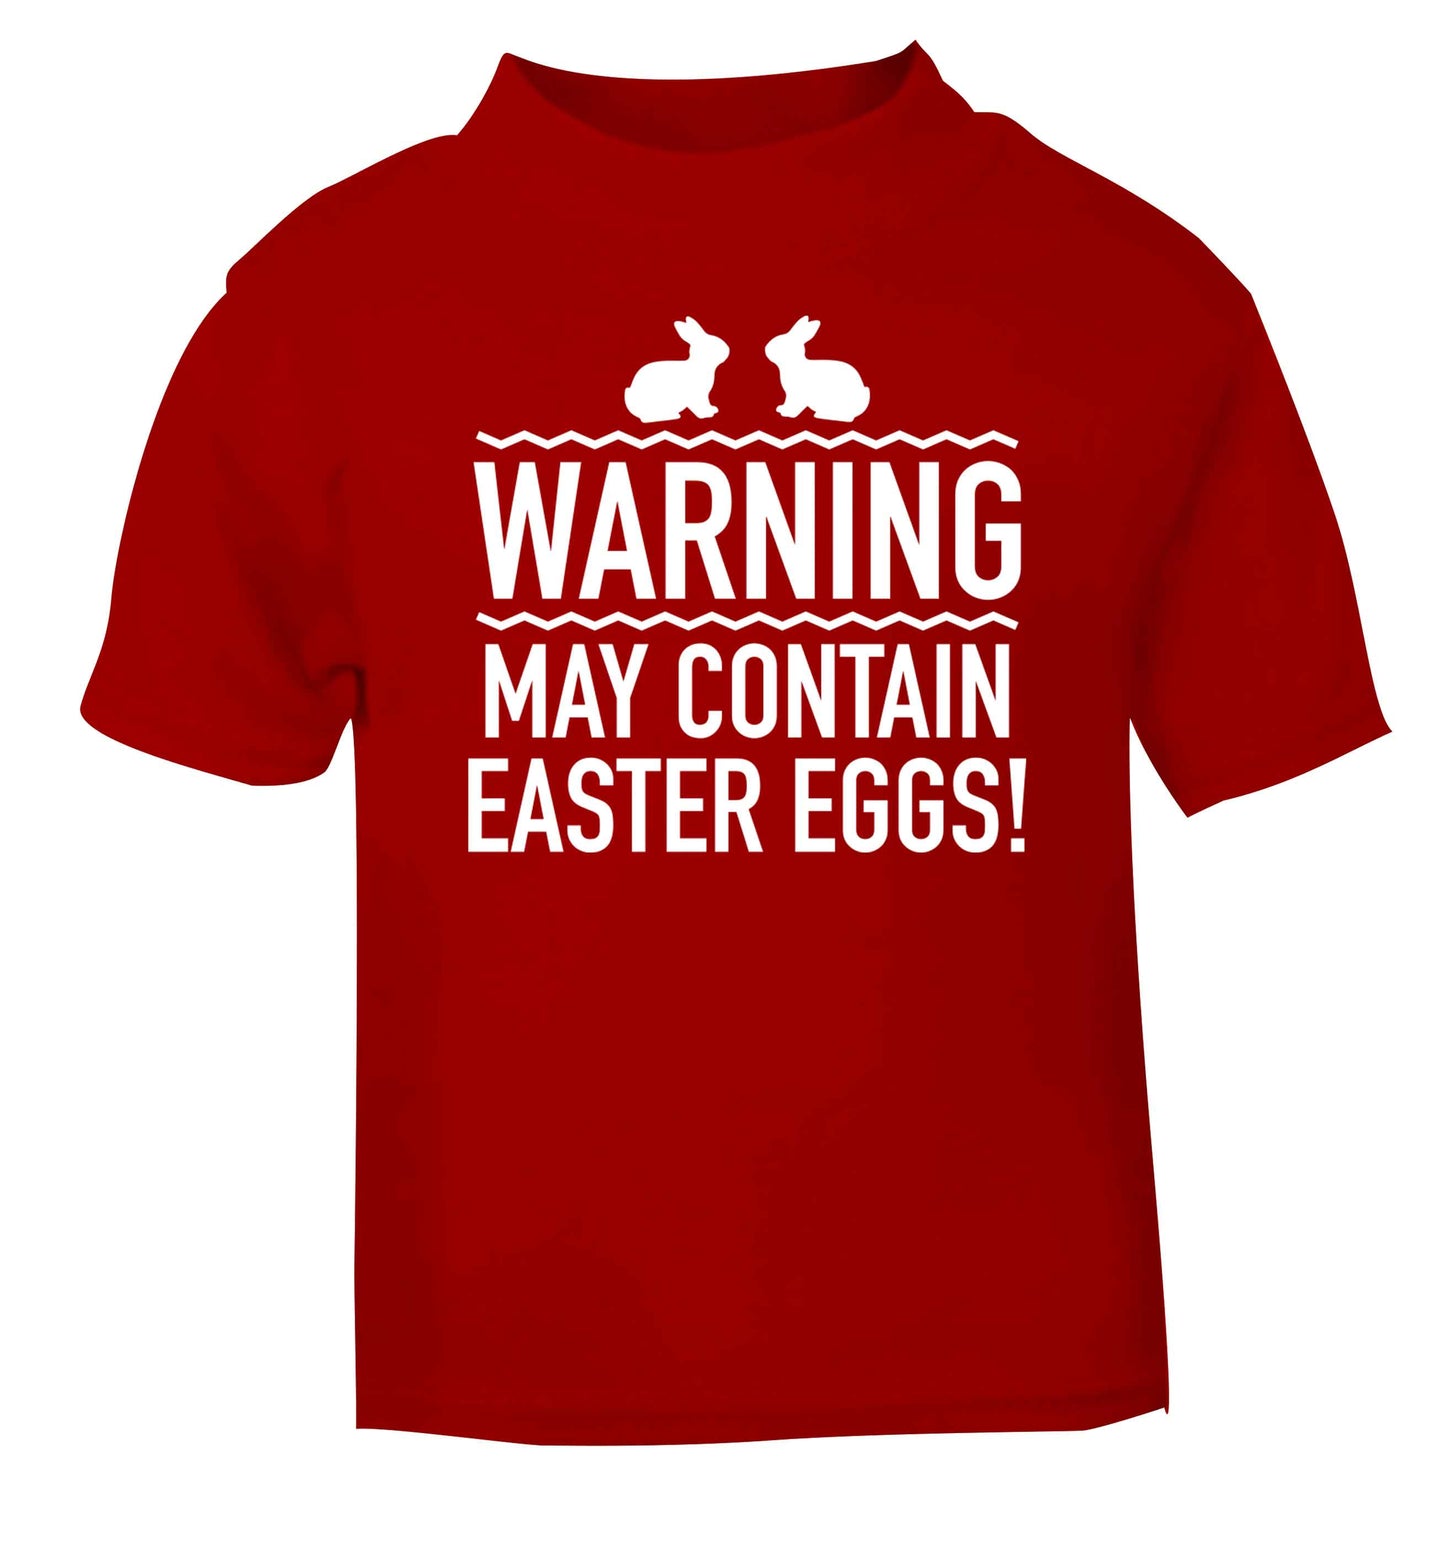 Warning may contain Easter eggs red baby toddler Tshirt 2 Years